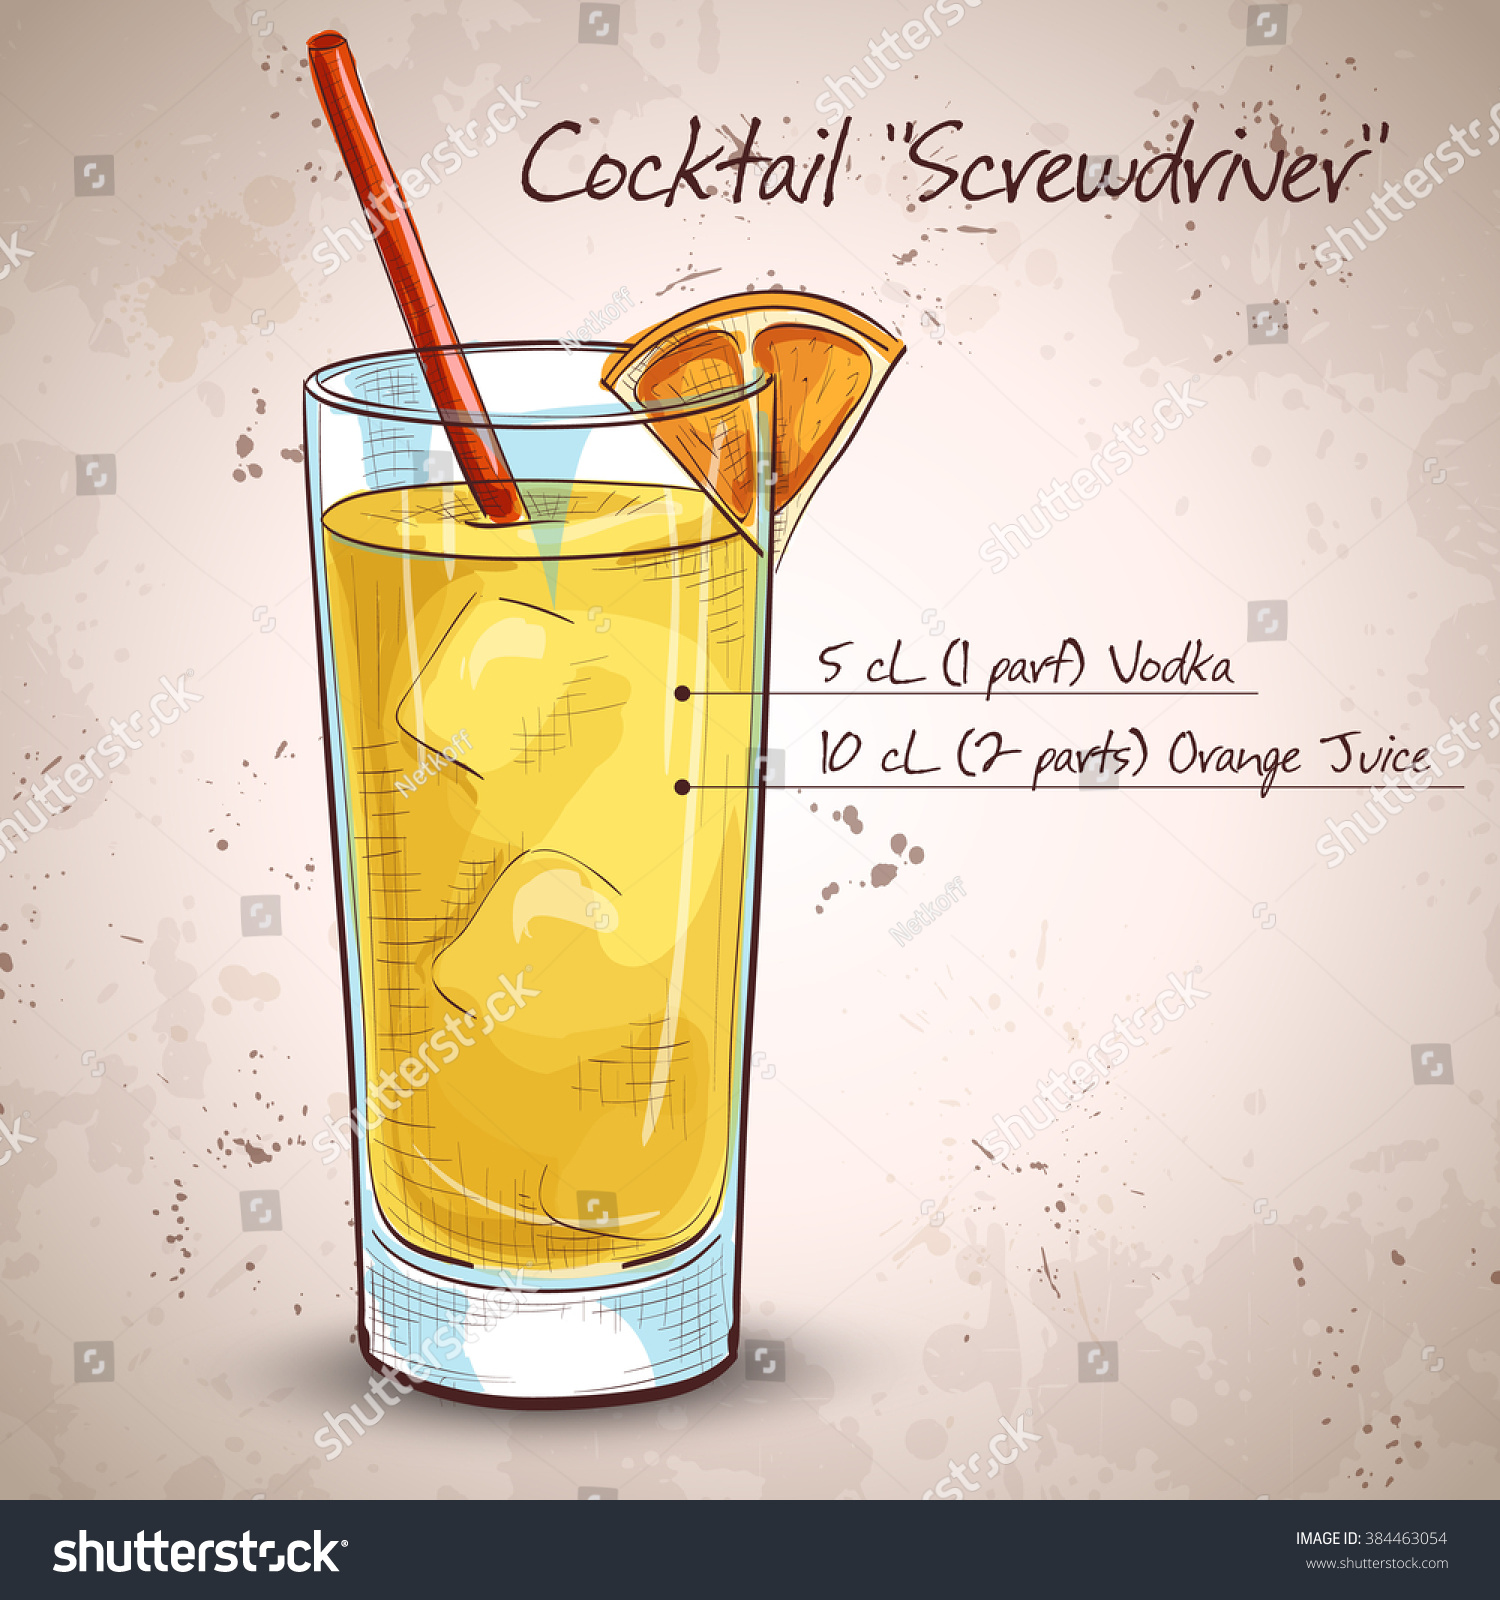 Screwdriver Cocktail Vodka Orange Juice Ice Stock Illustration 384463054,How Much Is A 1964 Quarter Worth In 2020